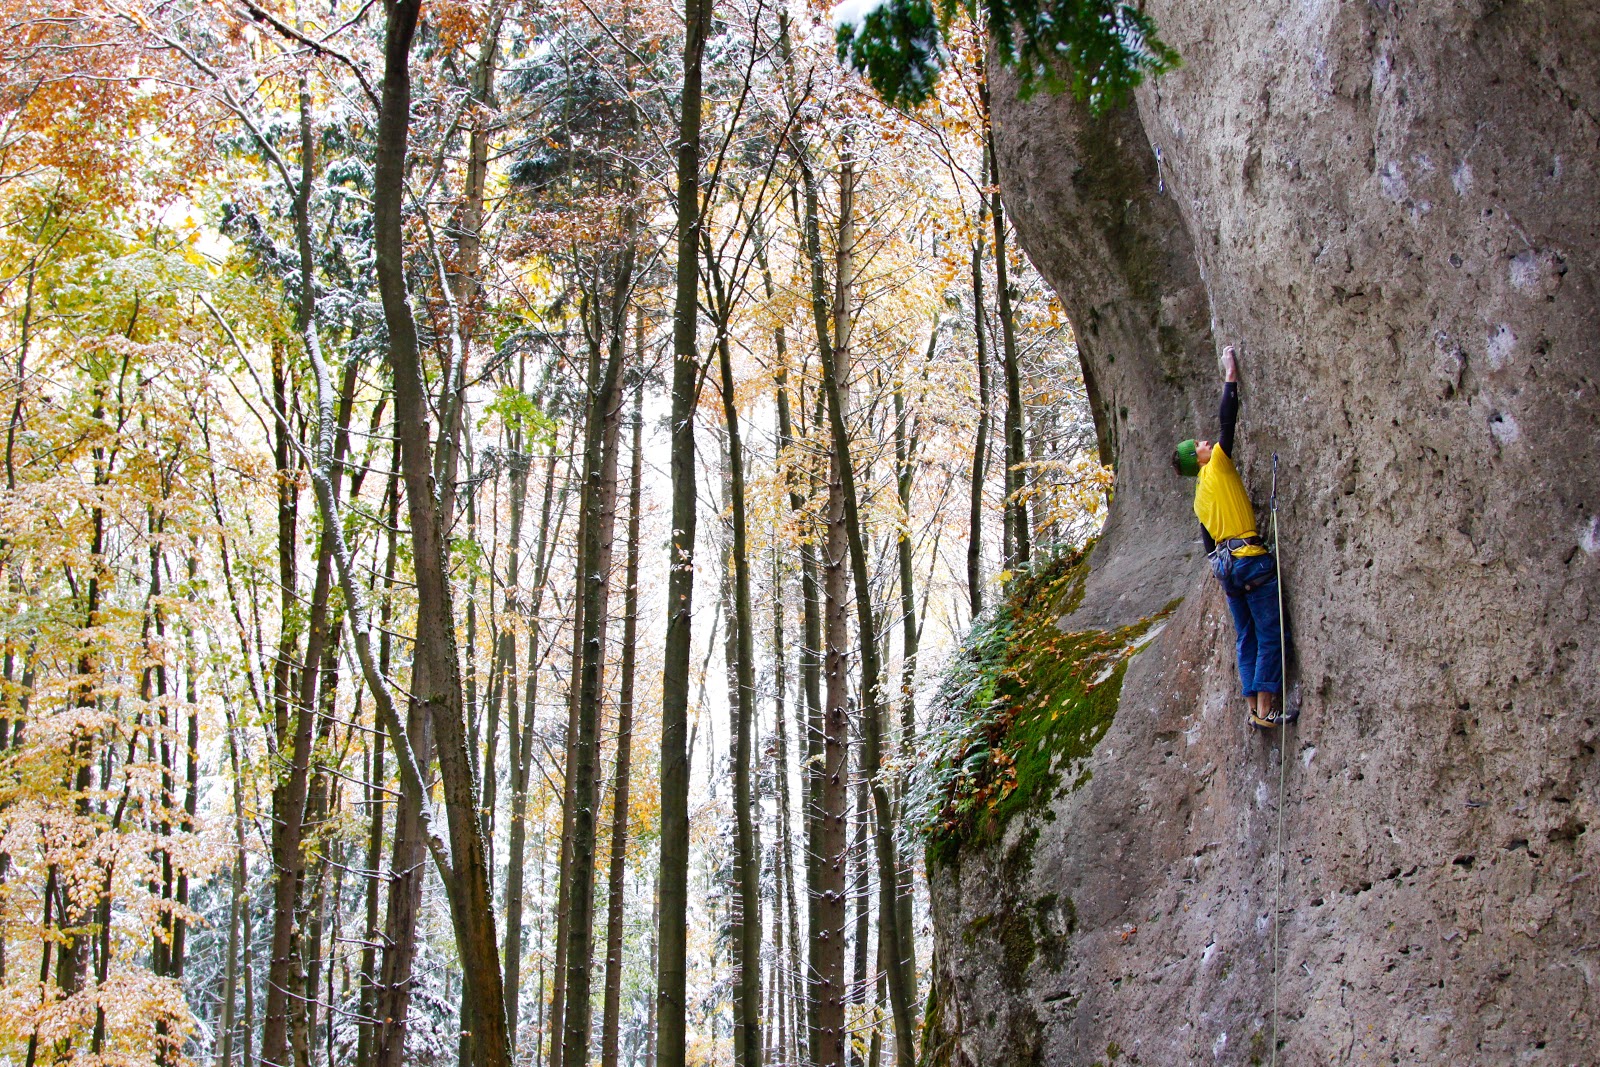 ... the World's first 8c with 'Wall Street' in Frankenjura. 1987